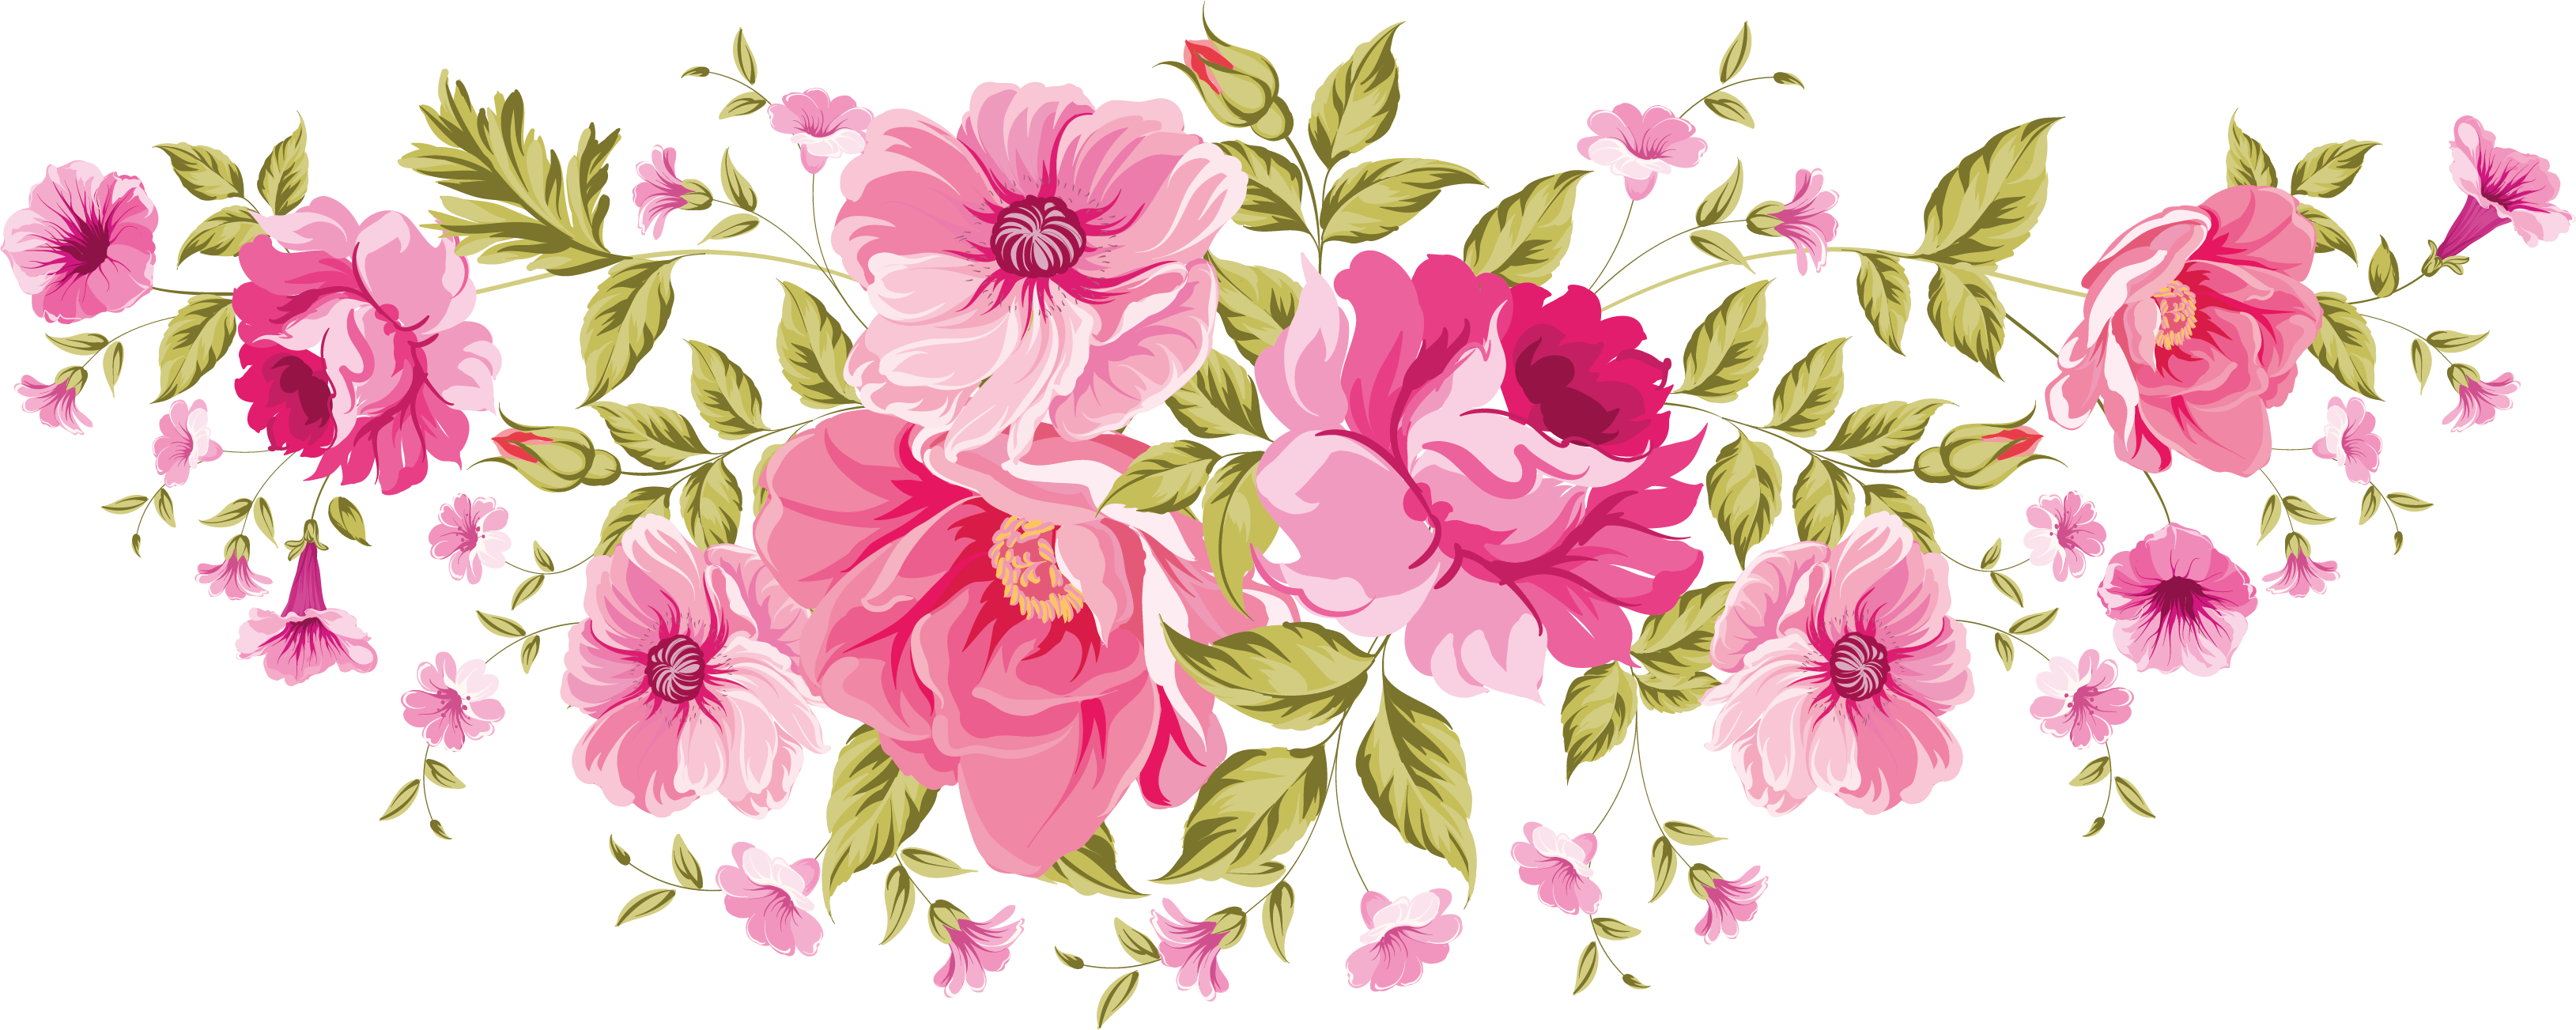 Colored Floral PNG Image Background